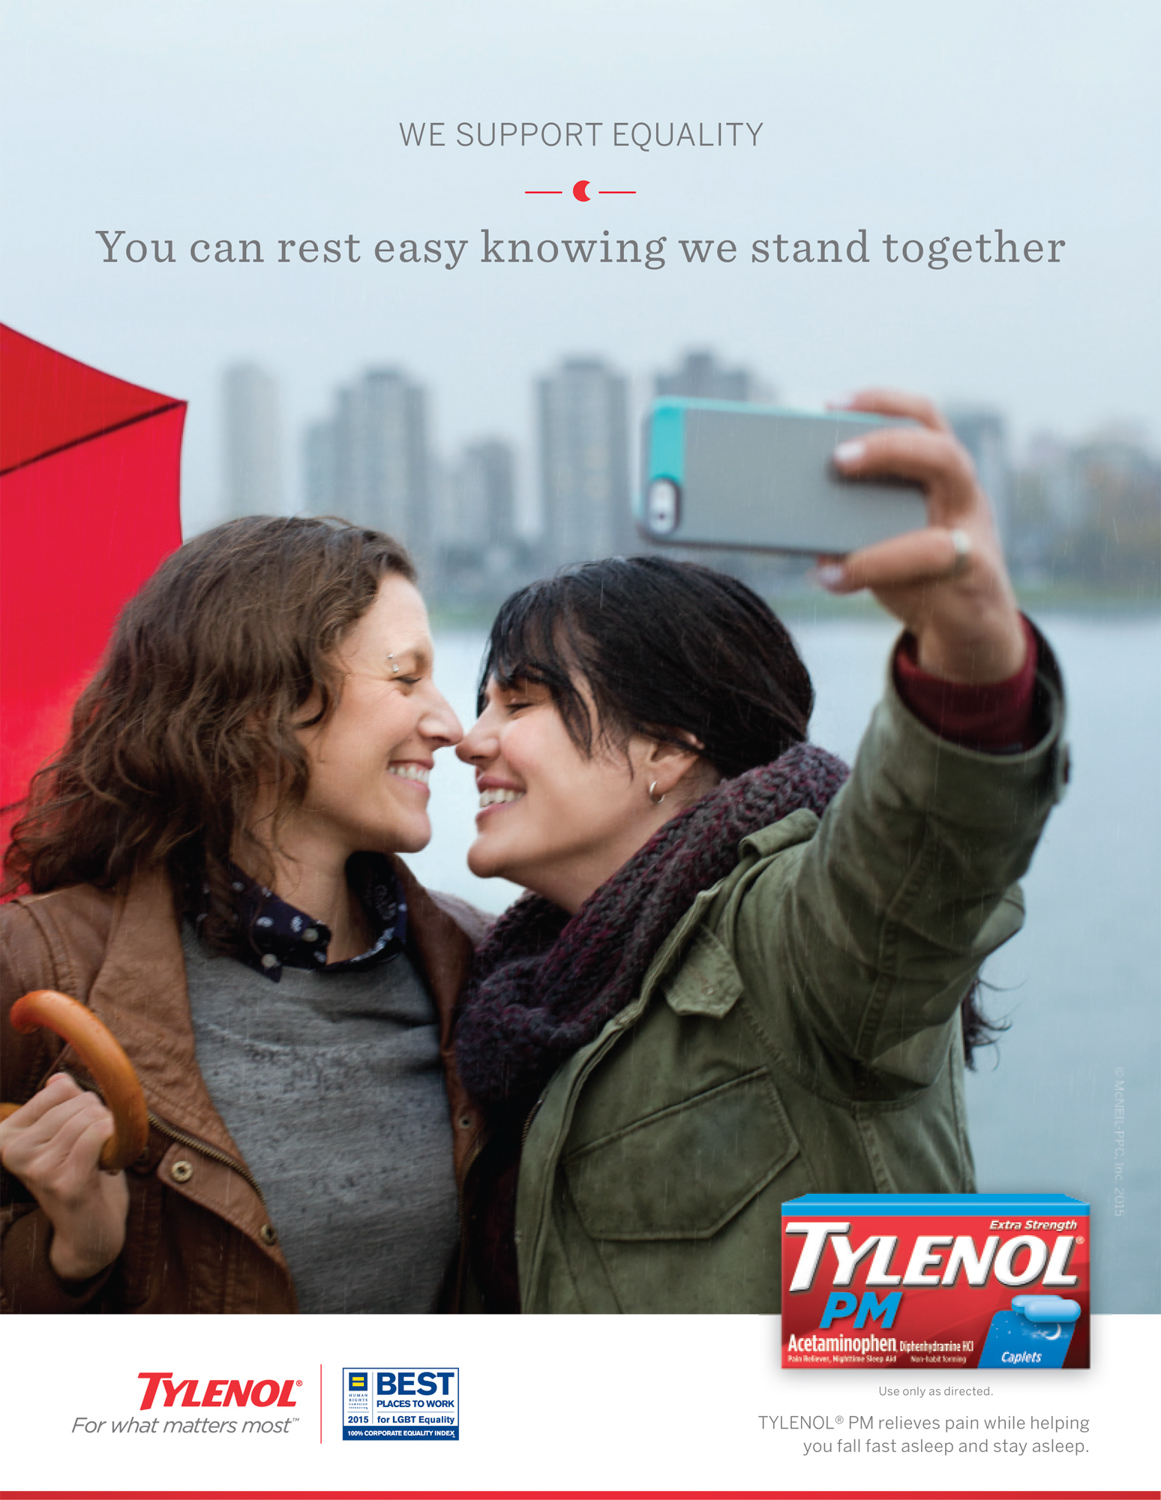 An LGBT couple kiss while taking a selfie in a Tylenol Ad Campaign photographed by Lifestyle Photographer Diana Mulvihill